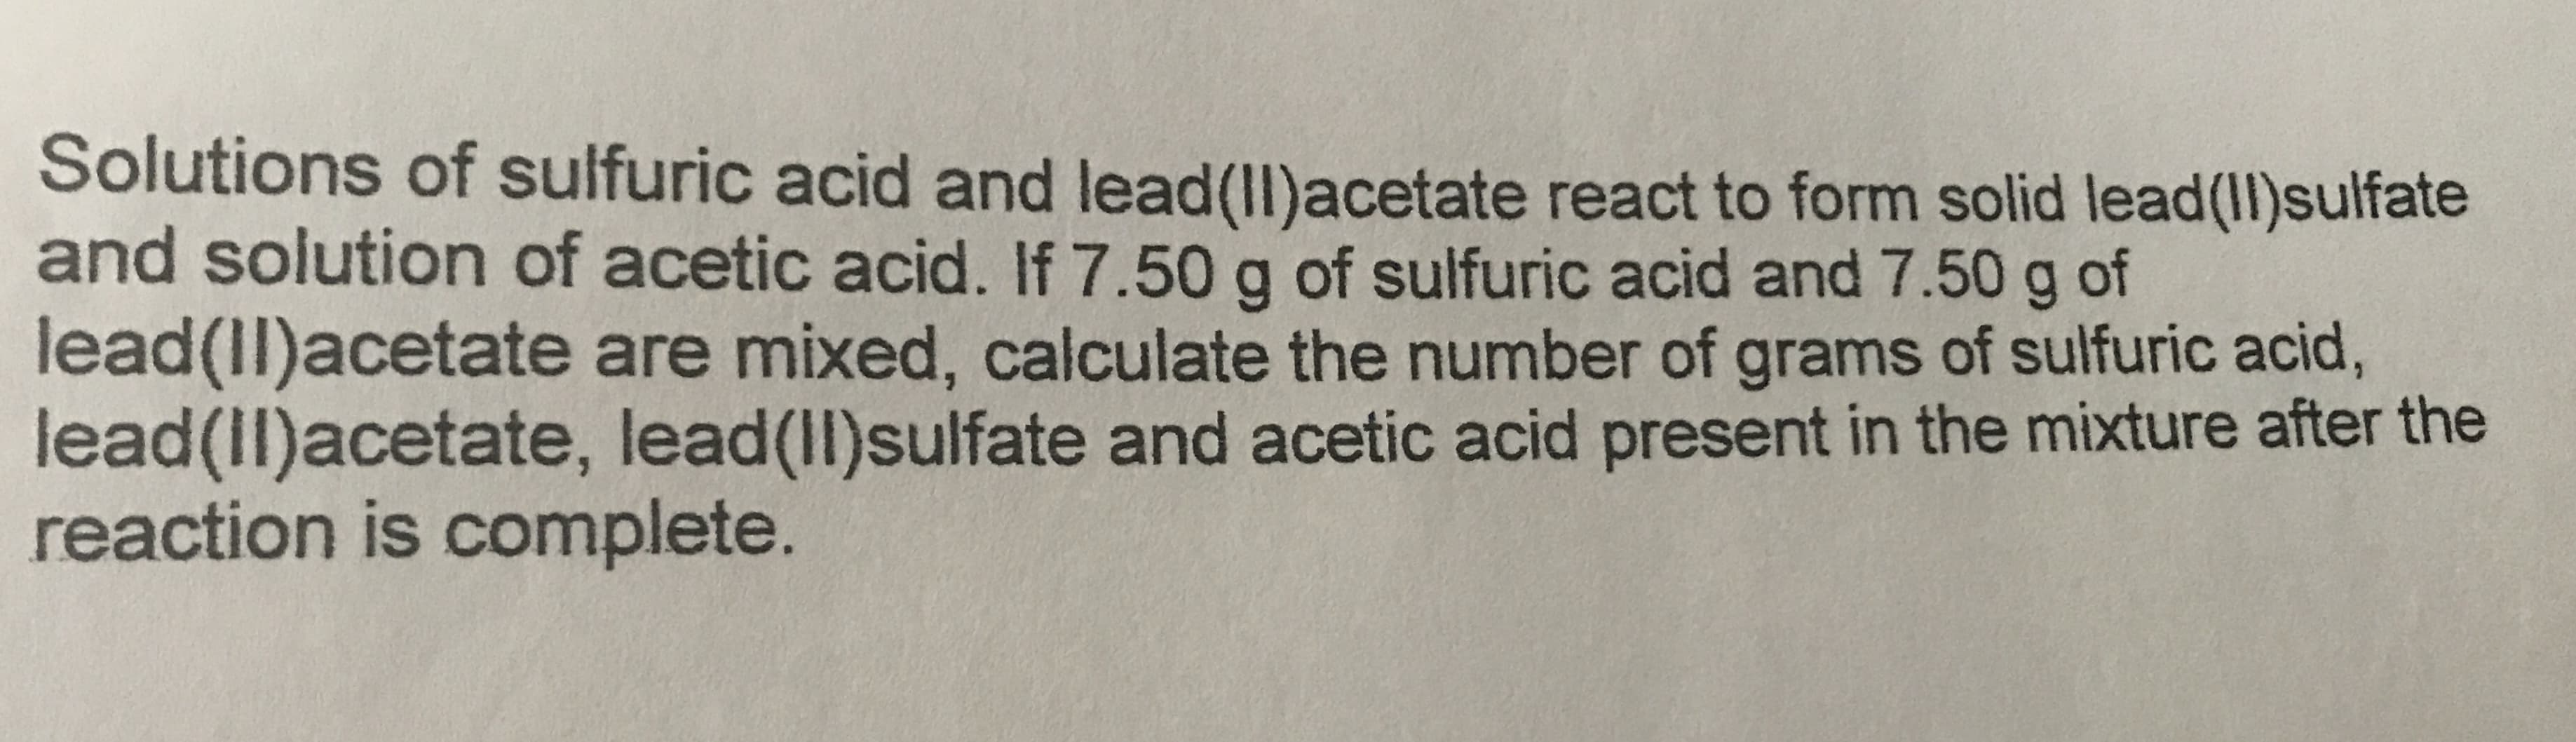 Solutions of sulfuric acid and lead(Il)acetate react to form solid lead(11)sulfate
and solution of acetic acid. If 7.50 g of sulfuric acid and 7.50 g of
lead(Il)acetate are mixed, calculate the number of grams of sulfuric acid,
lead(II)acetate, lead(Il)sulfate and acetic acid present in the mixture after the
reaction is complete.
